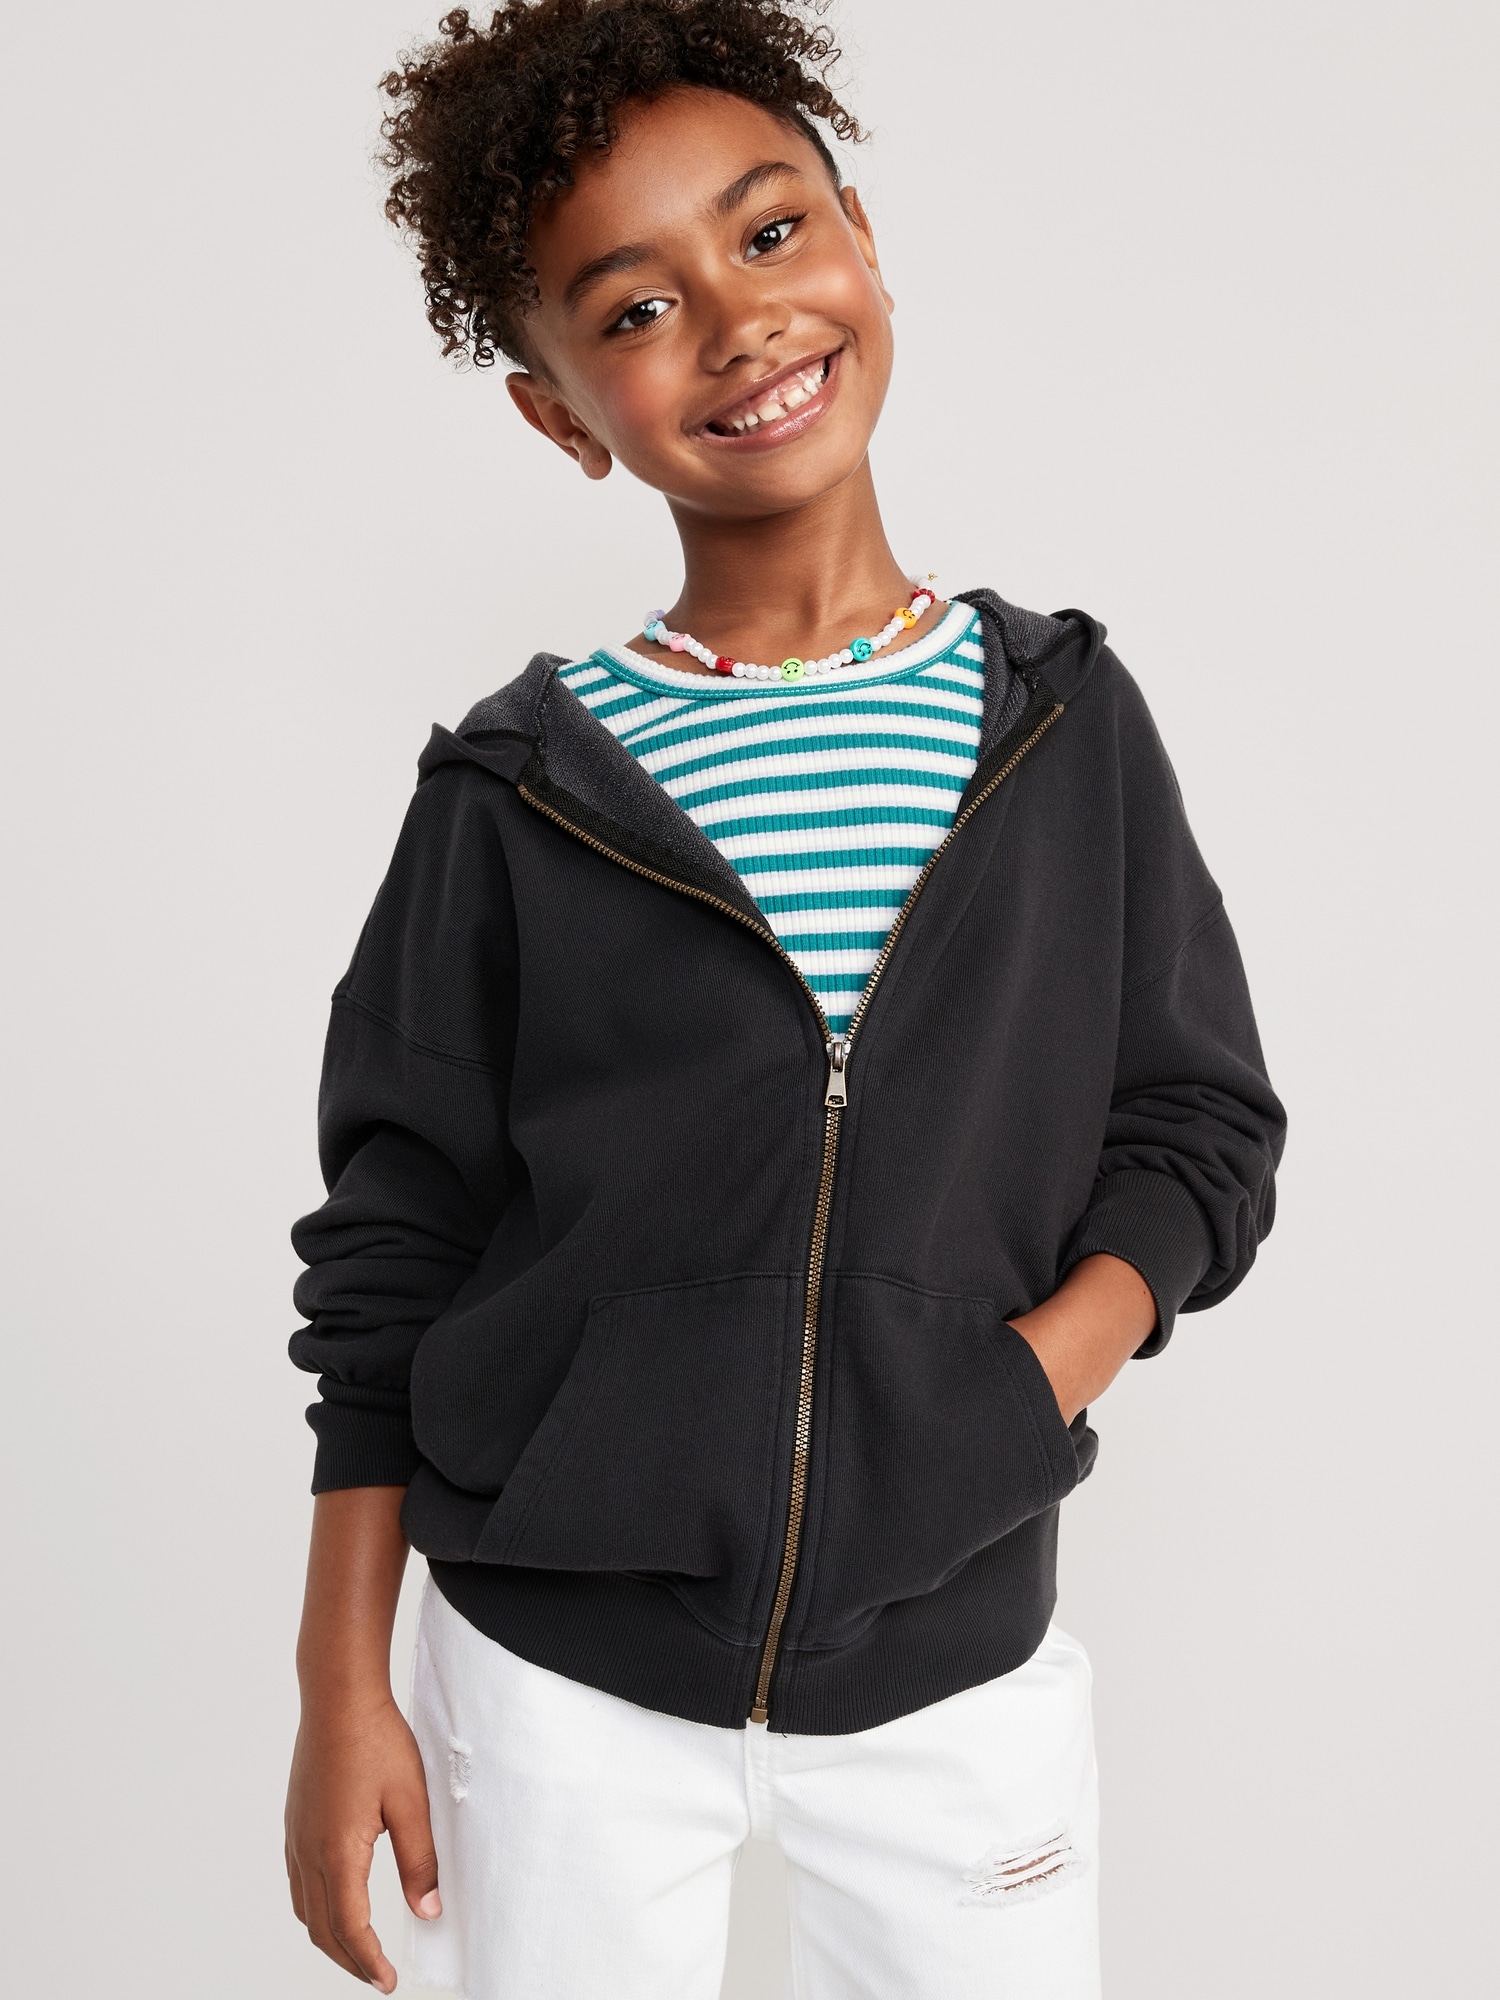 French Terry Zip Tunic Hoodie for Girls | Old Navy